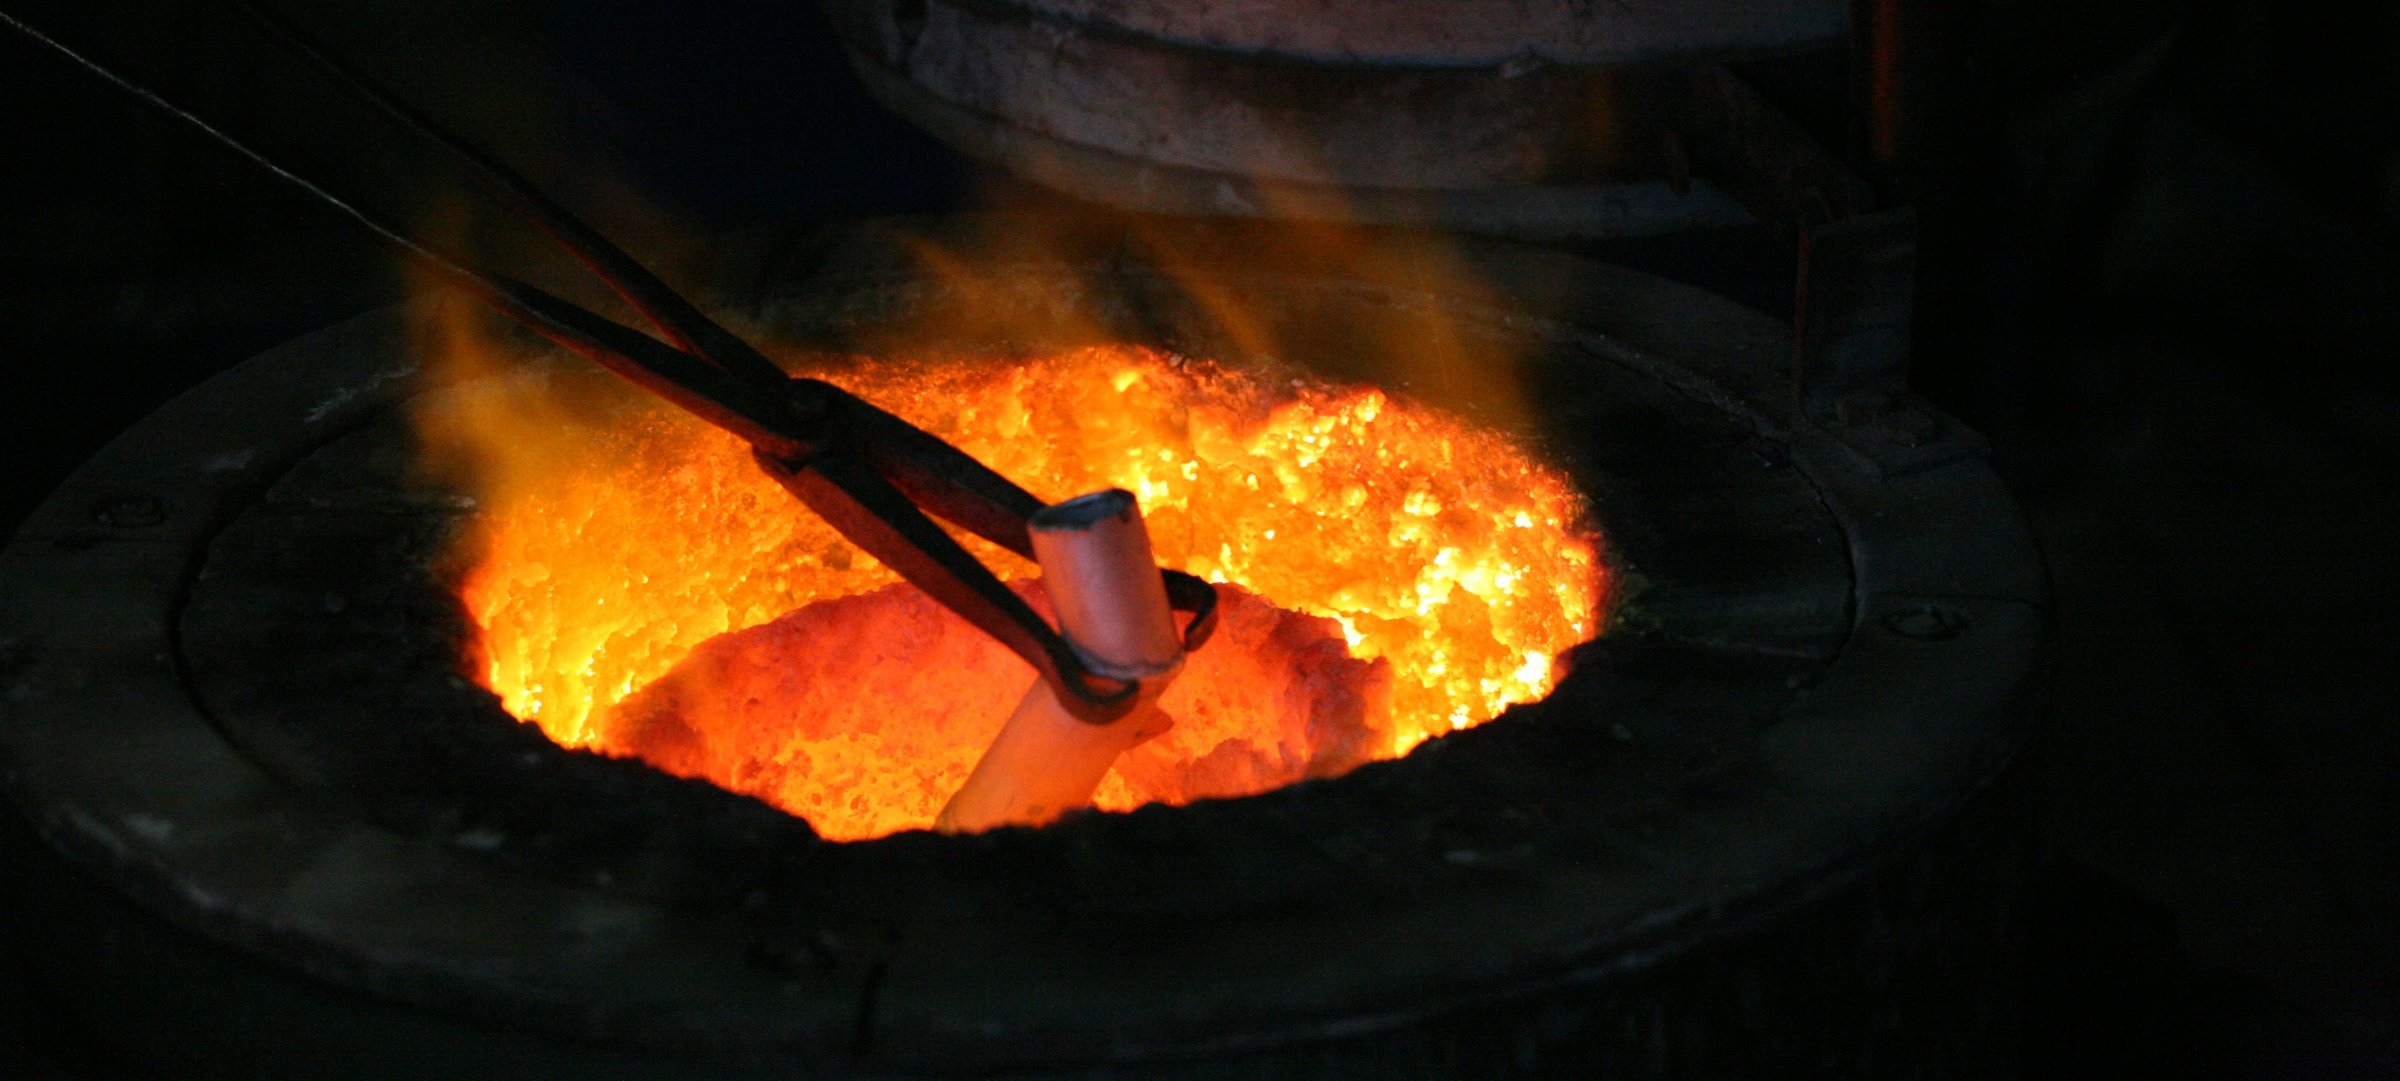 Researcher using tongs to dip a material inside the foundry.